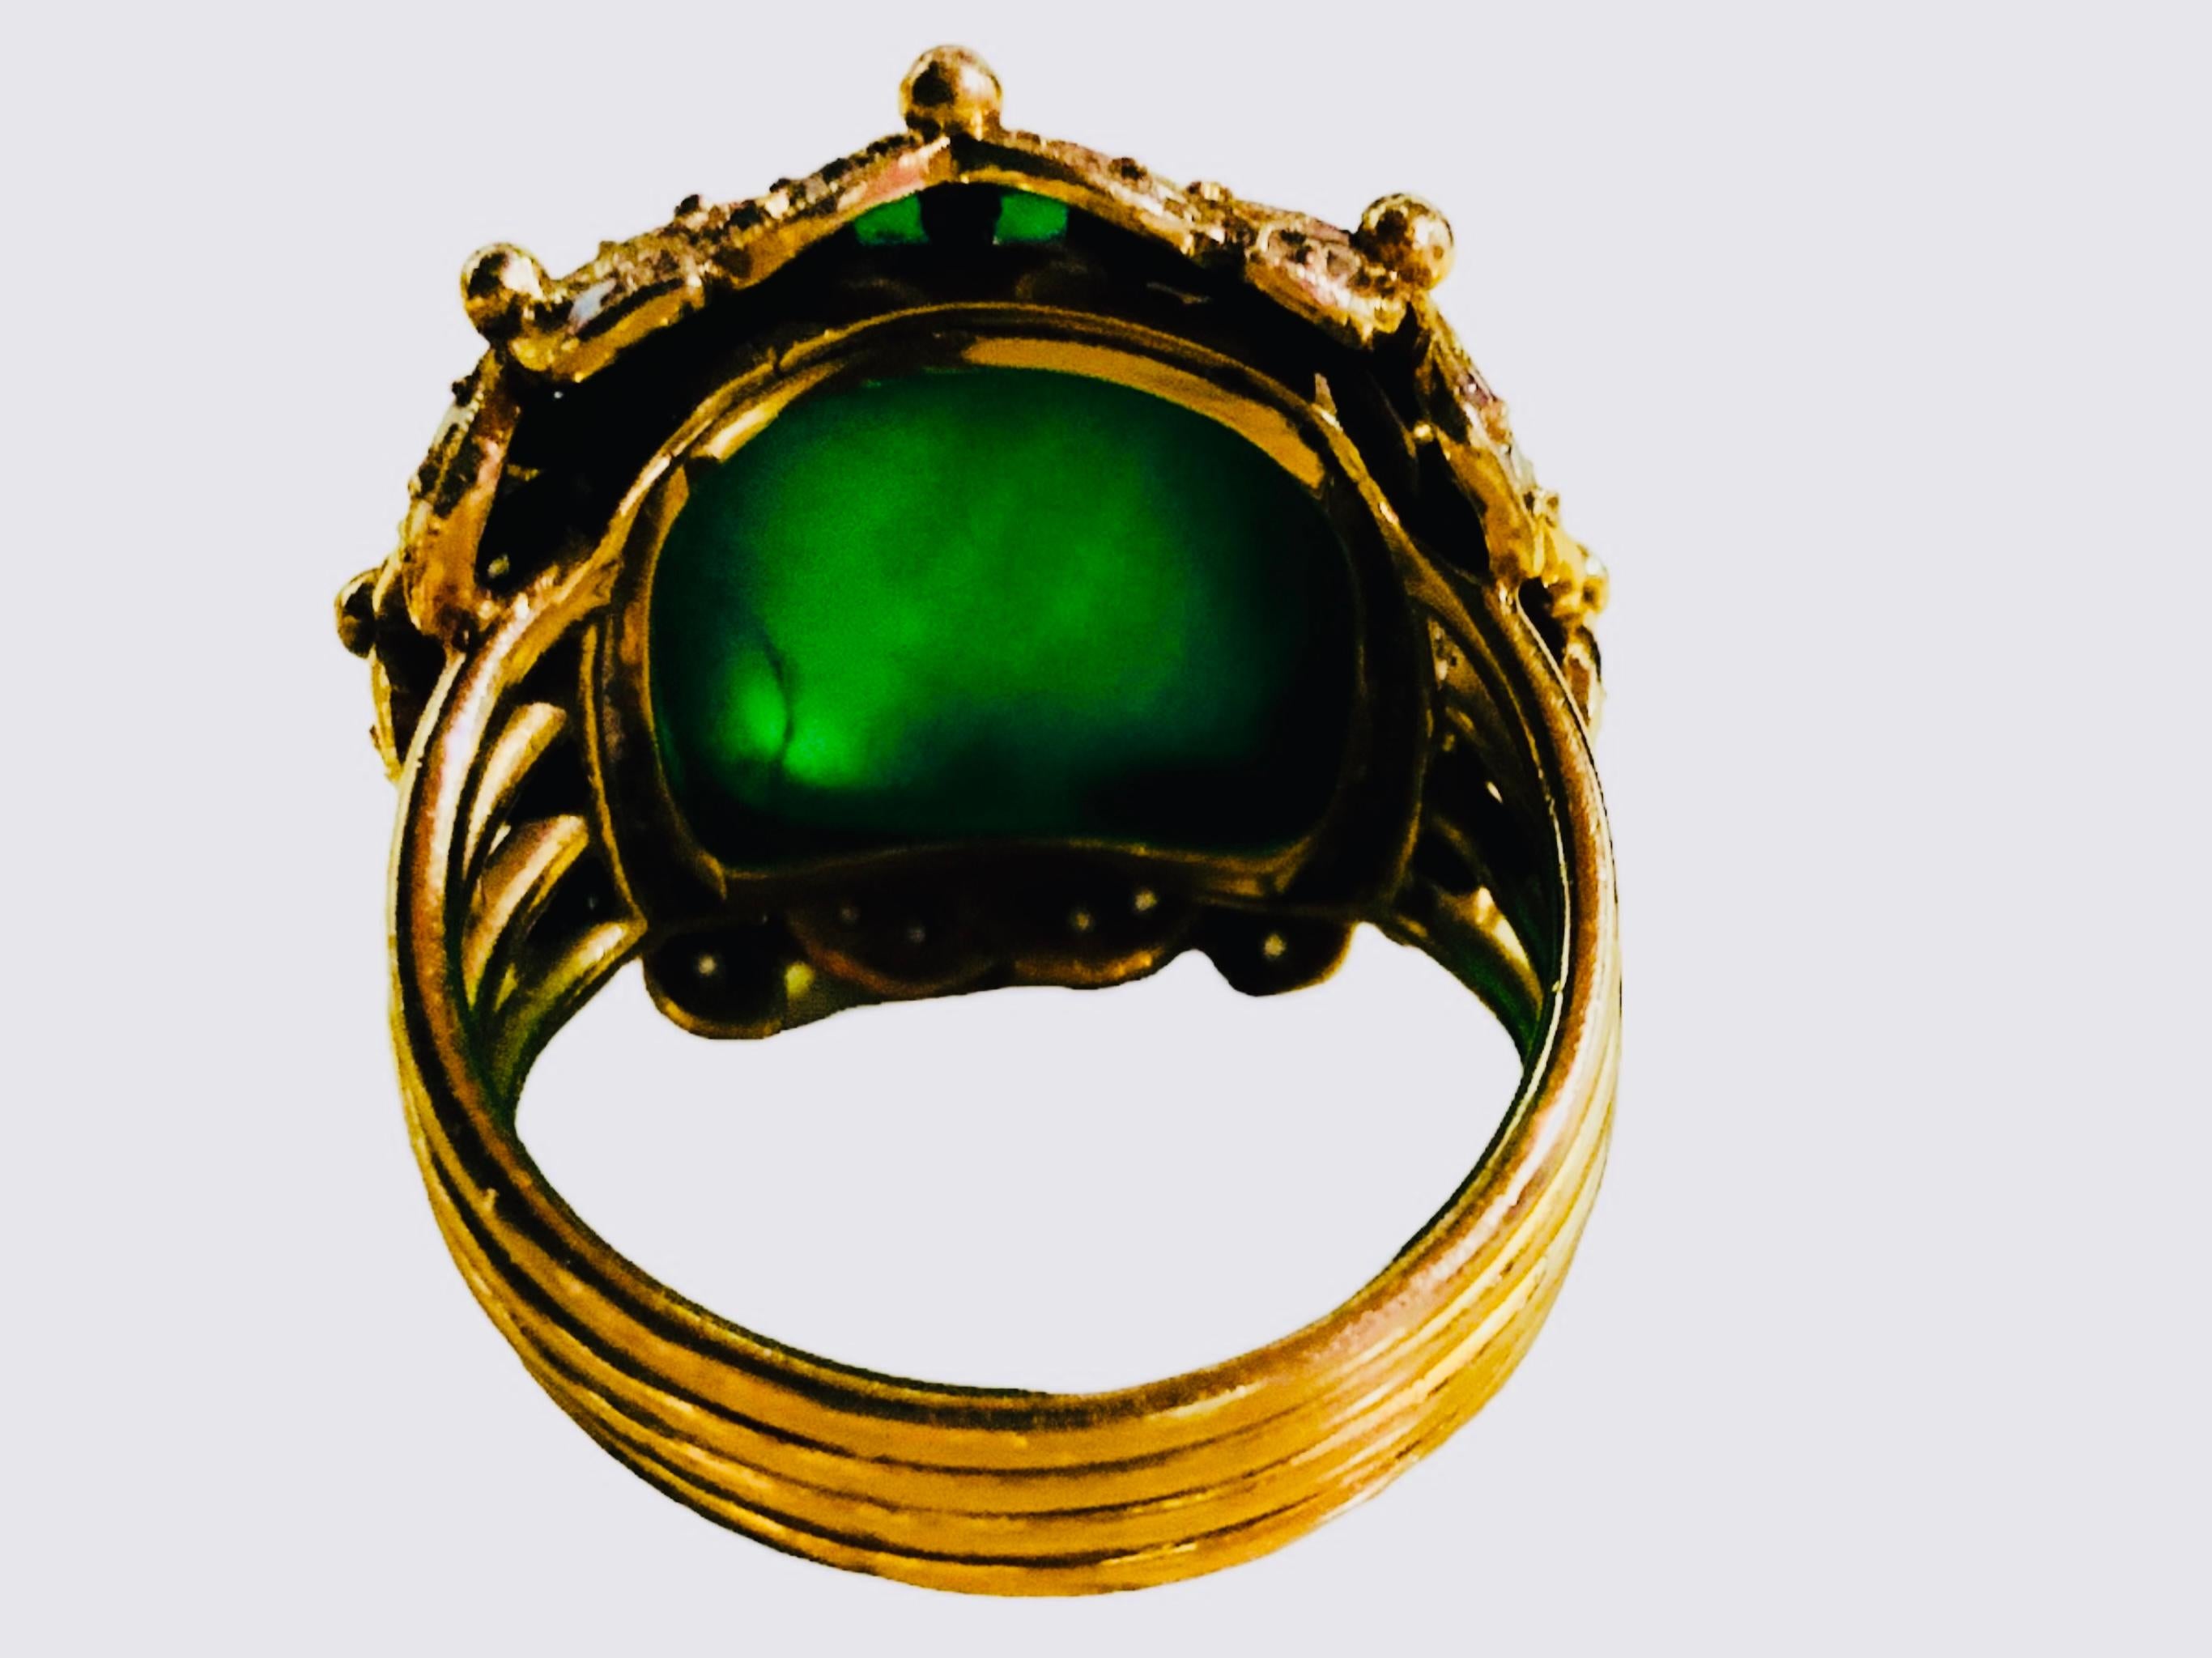 This is an 18K yellow gold, green emerald color crystal and diamonds ring. It depicts a high dome/bullet shaped semi-transparent green crystal measuring 13.5 x 13.5 x 9.5mm on gold bezel setting. Its base surrounded by a wreath made of four petals